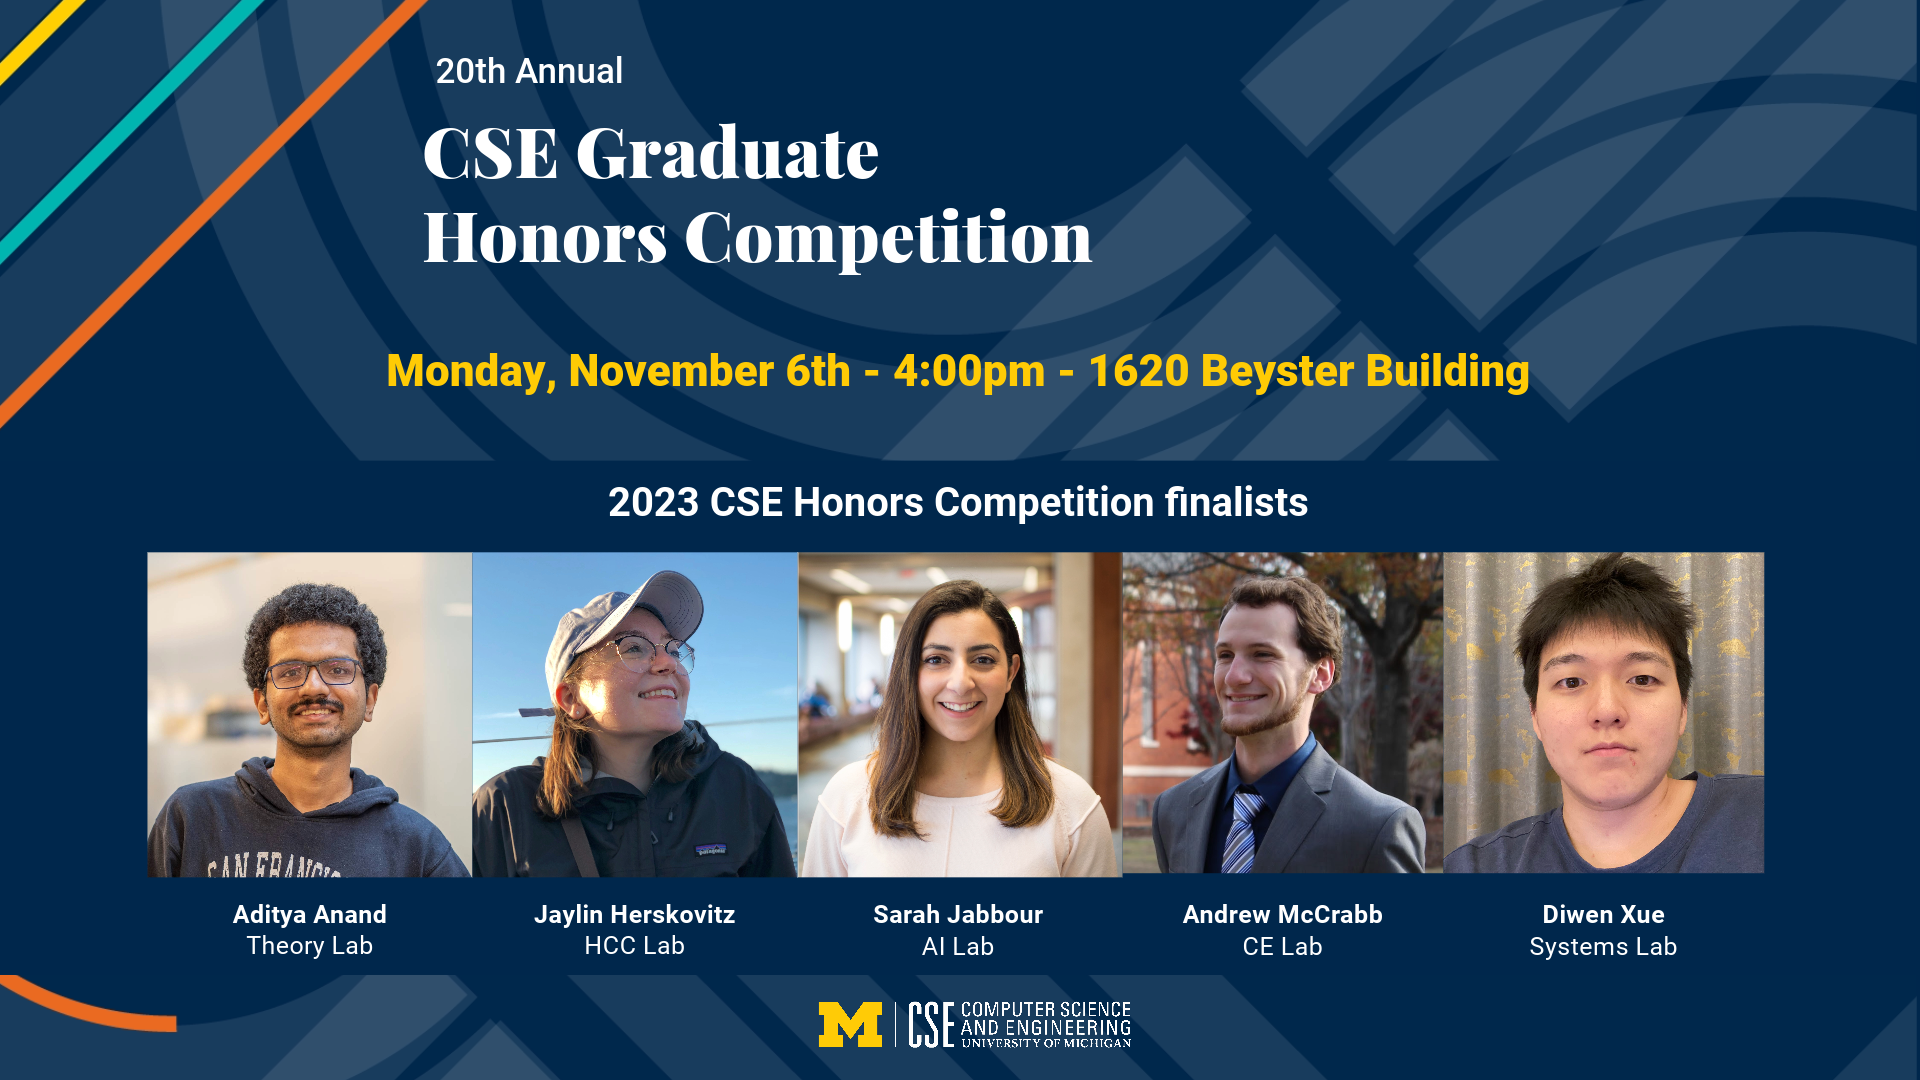 2023 Grad Honors Competition flyer with pictures of the finalists and event details